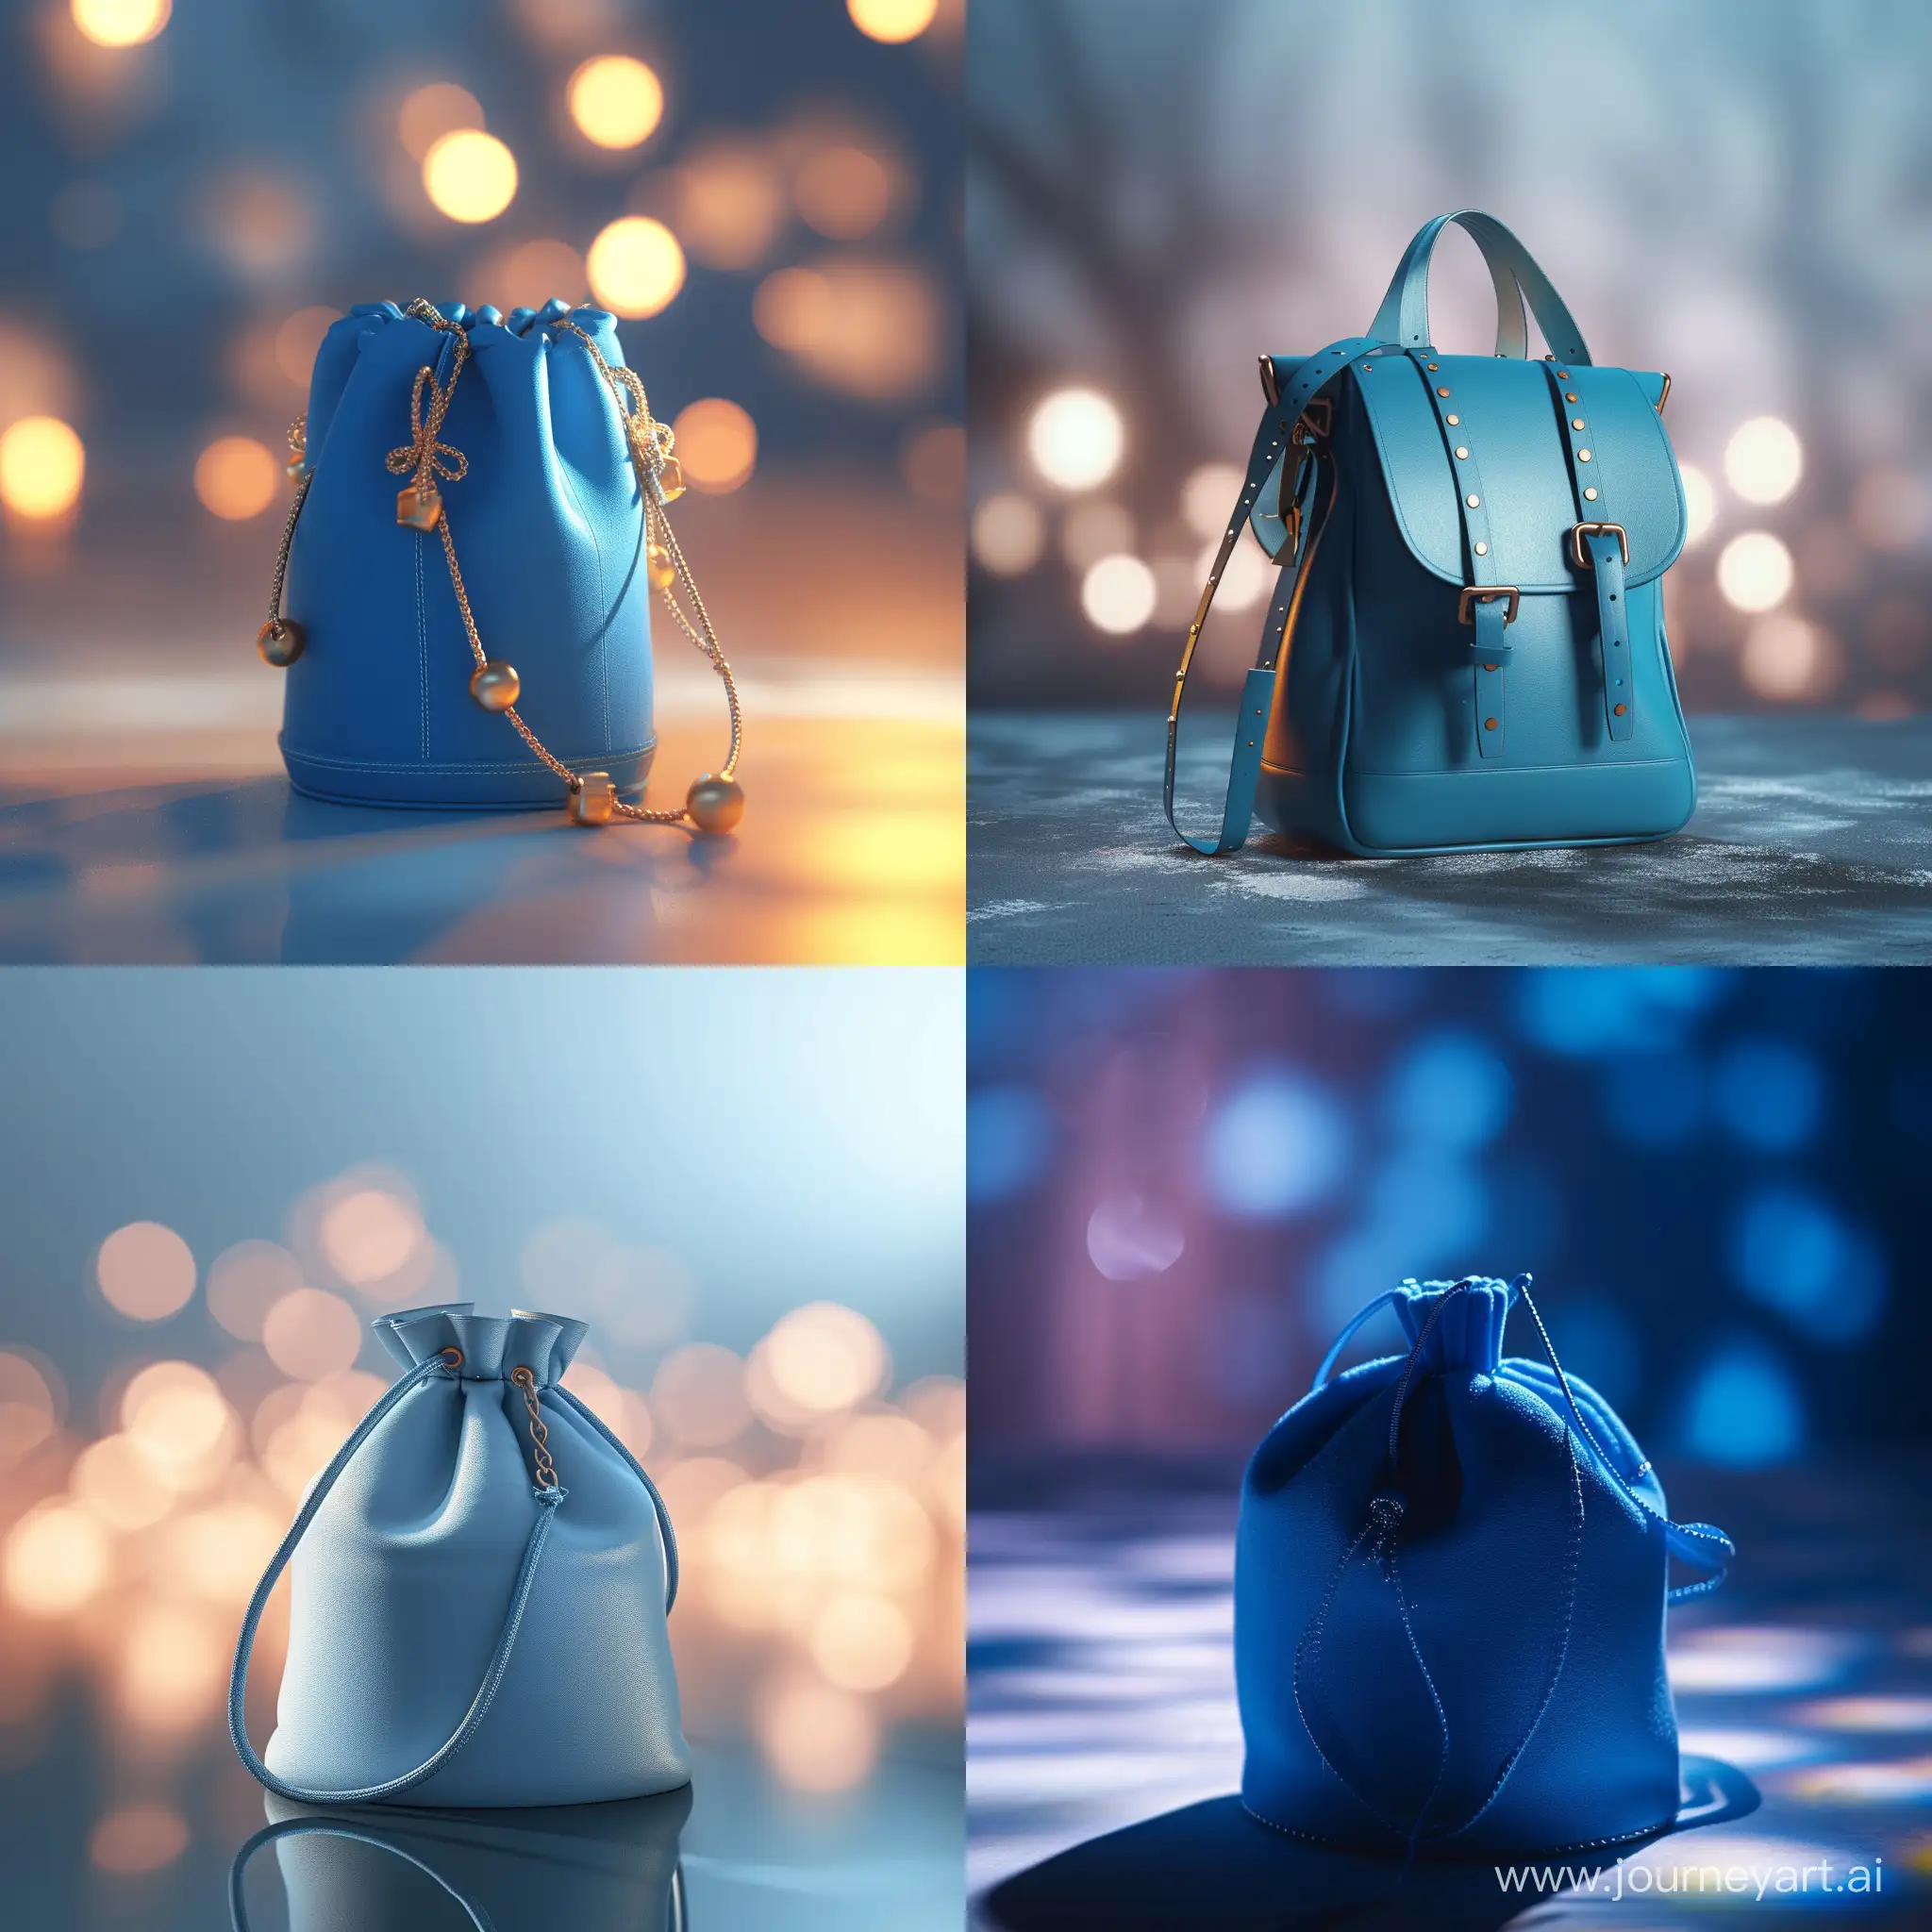 Cinematic-Blue-Bag-with-Contour-Lighting-and-Bokeh-Background